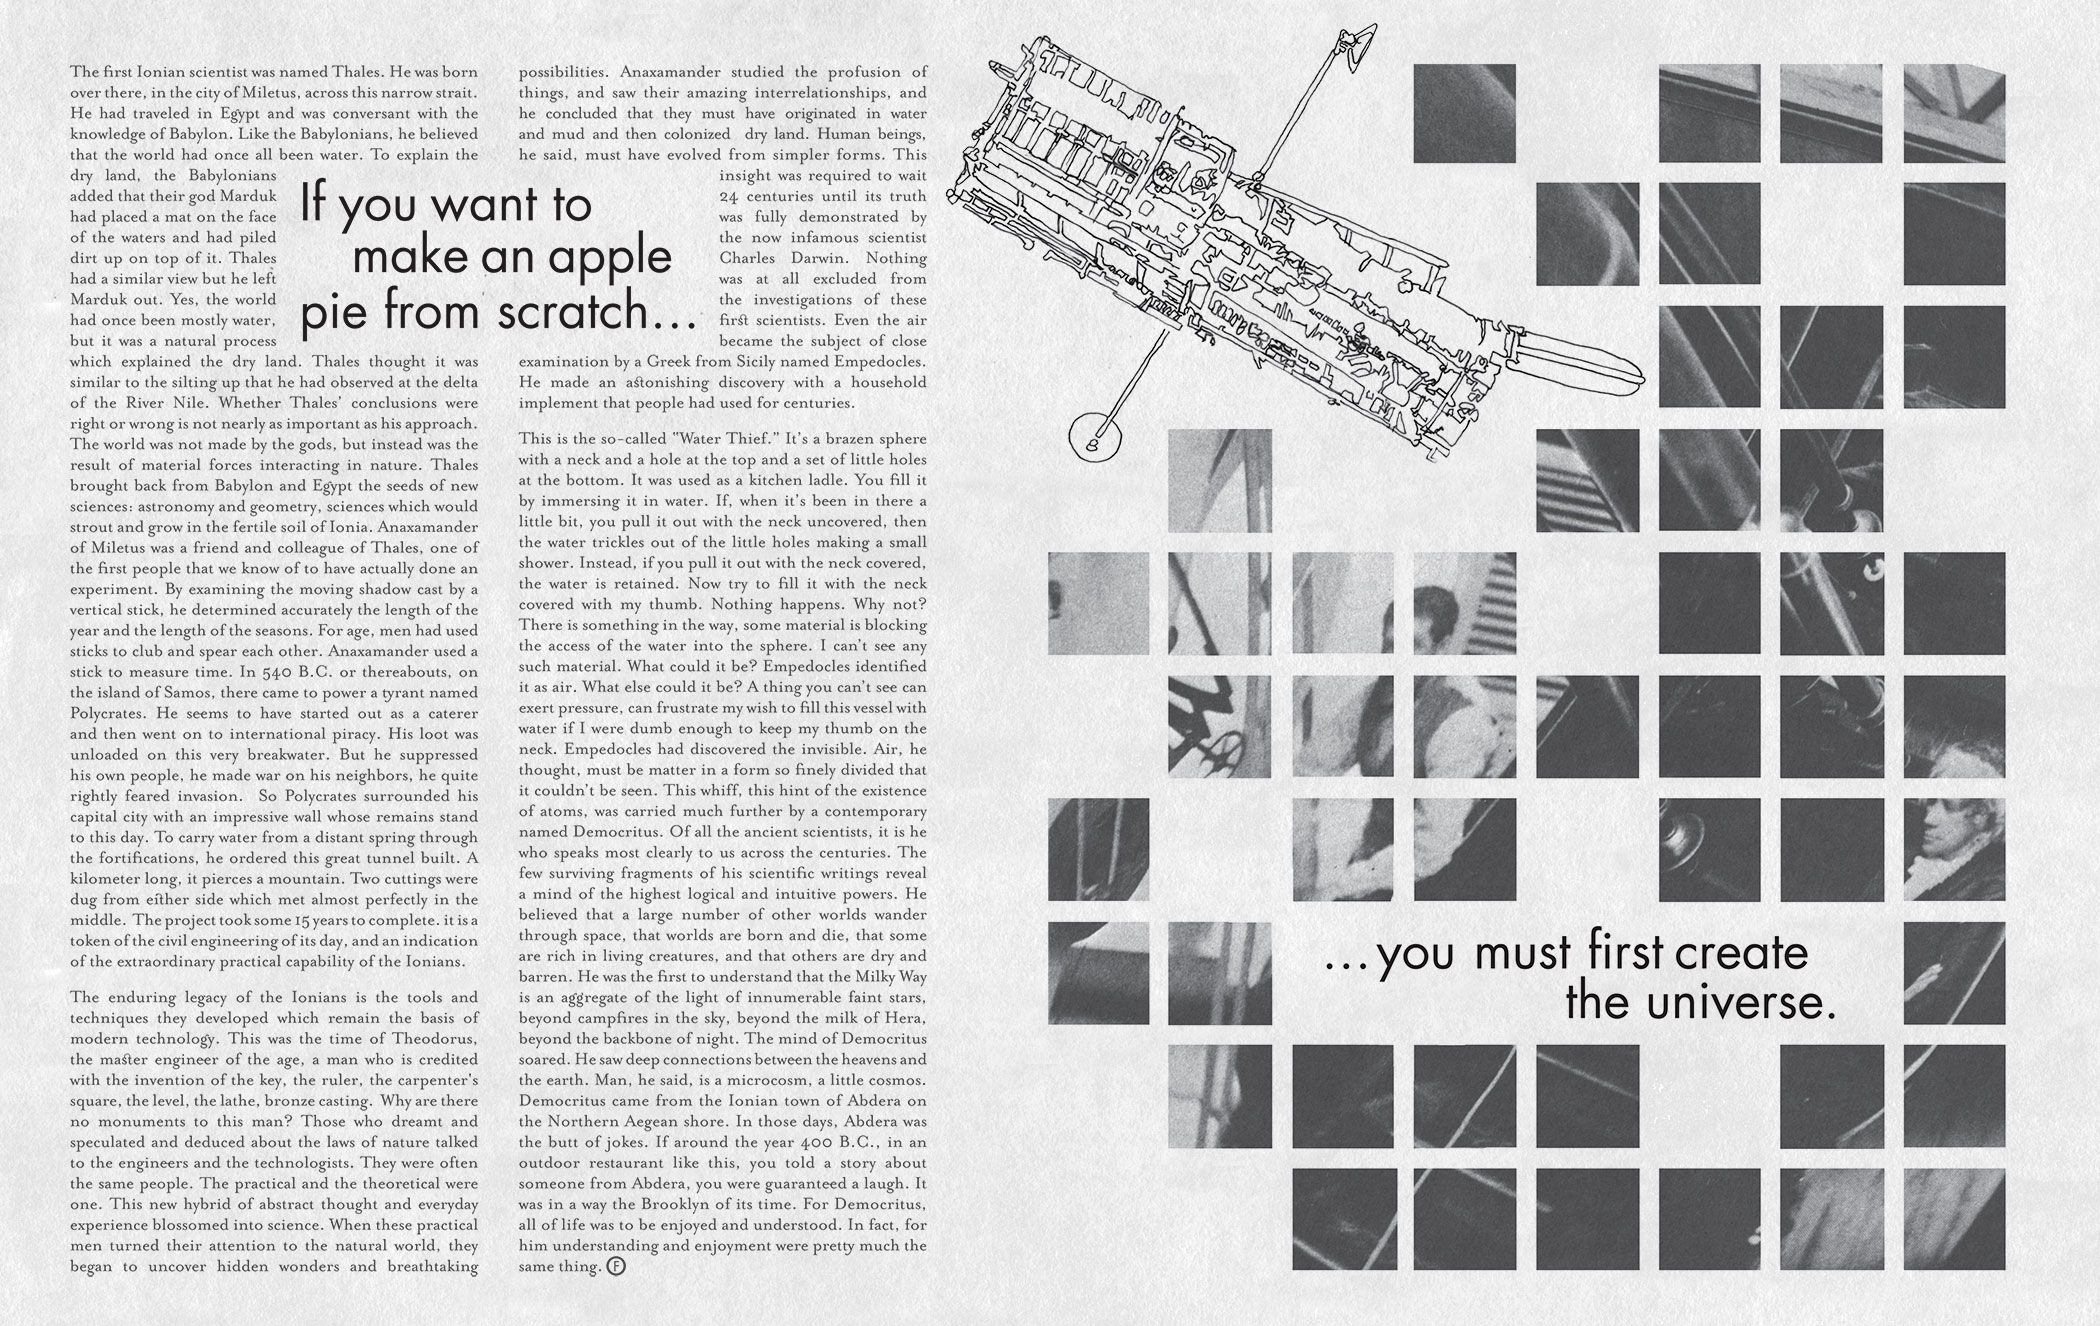 An editorial spread with images, text and an images of astronomers looking through telescopes